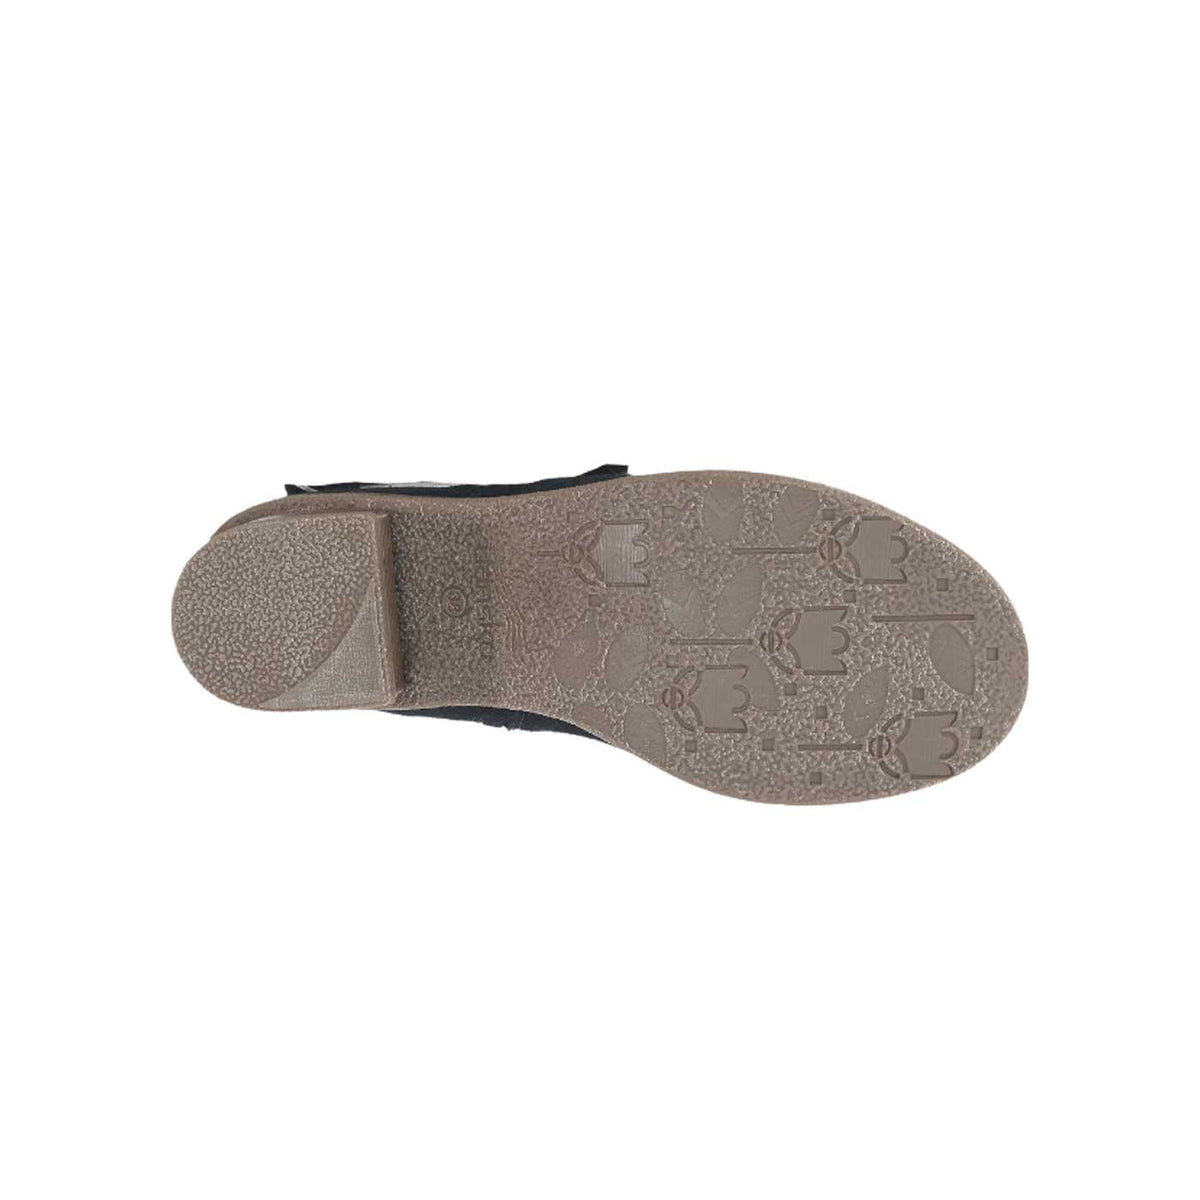 Sole of a Dansko Dalinda Black Suede - Womens shoe crafted from waterproof leathers, displaying a textured pattern and visible Dansko logos.